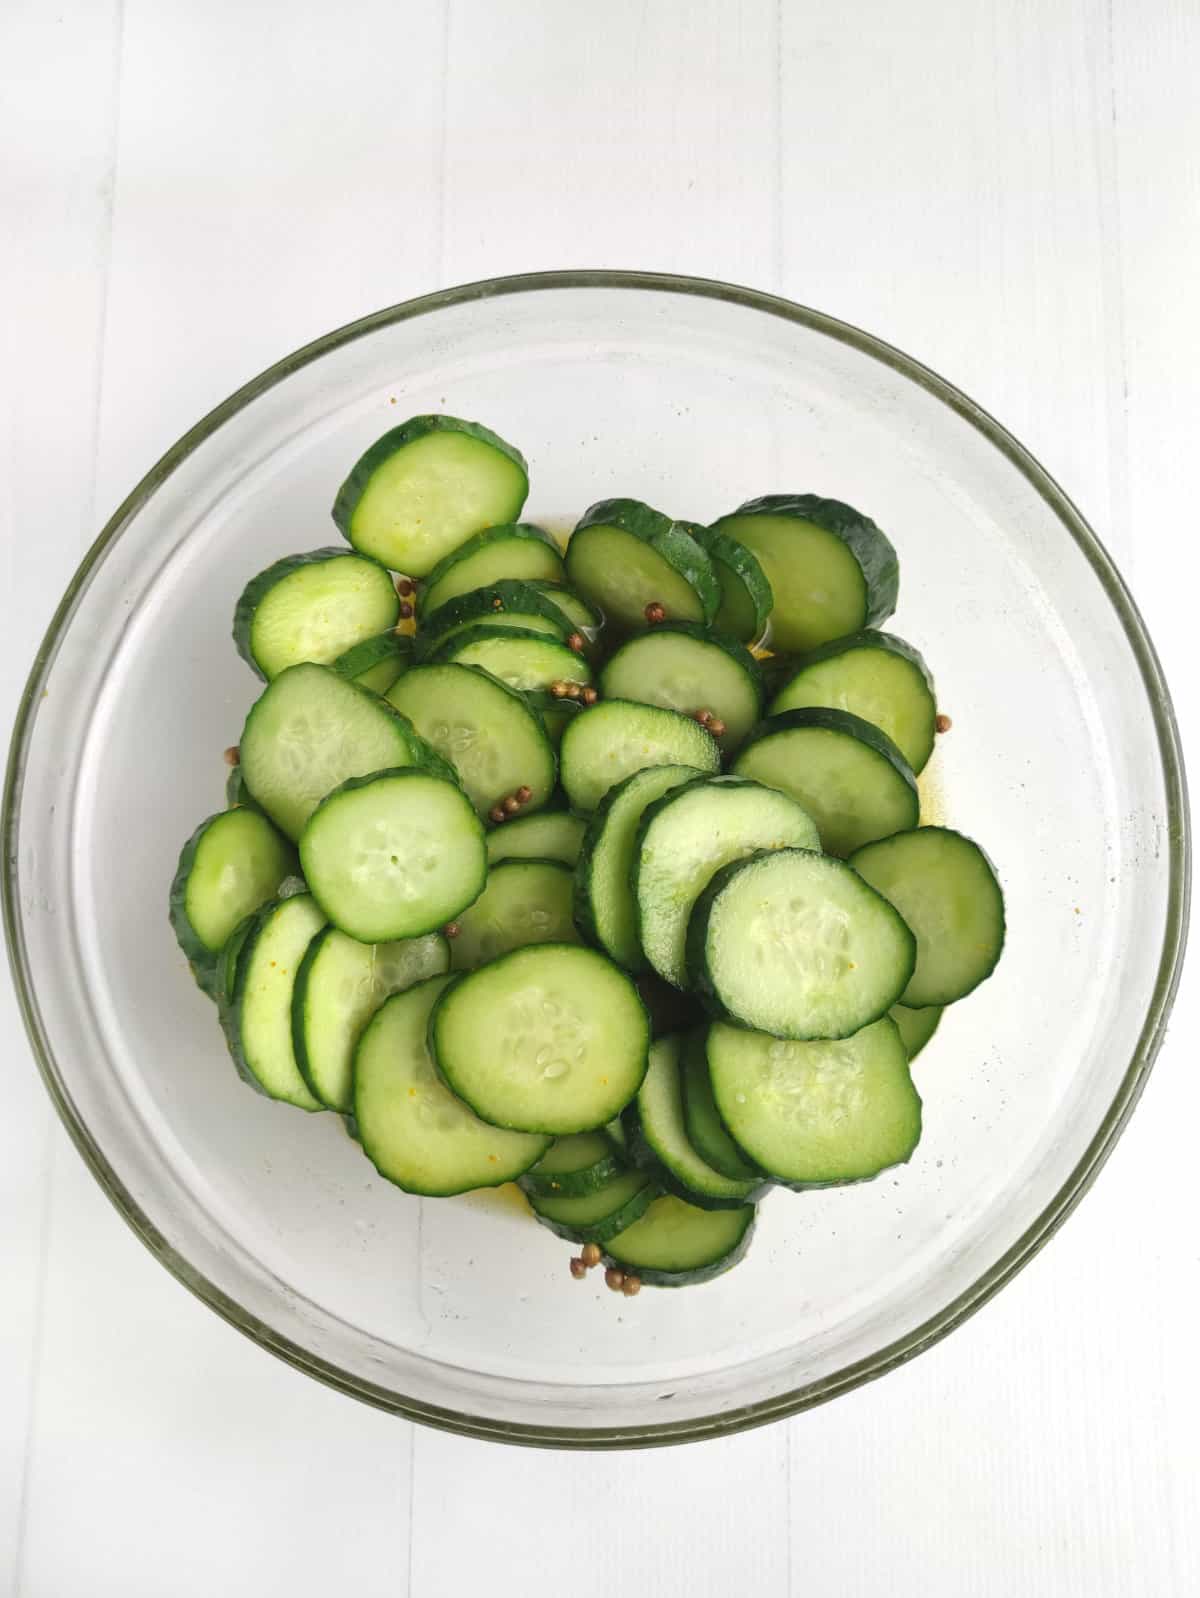 cucumber slices brining for sweet bread and butter pickle slices.